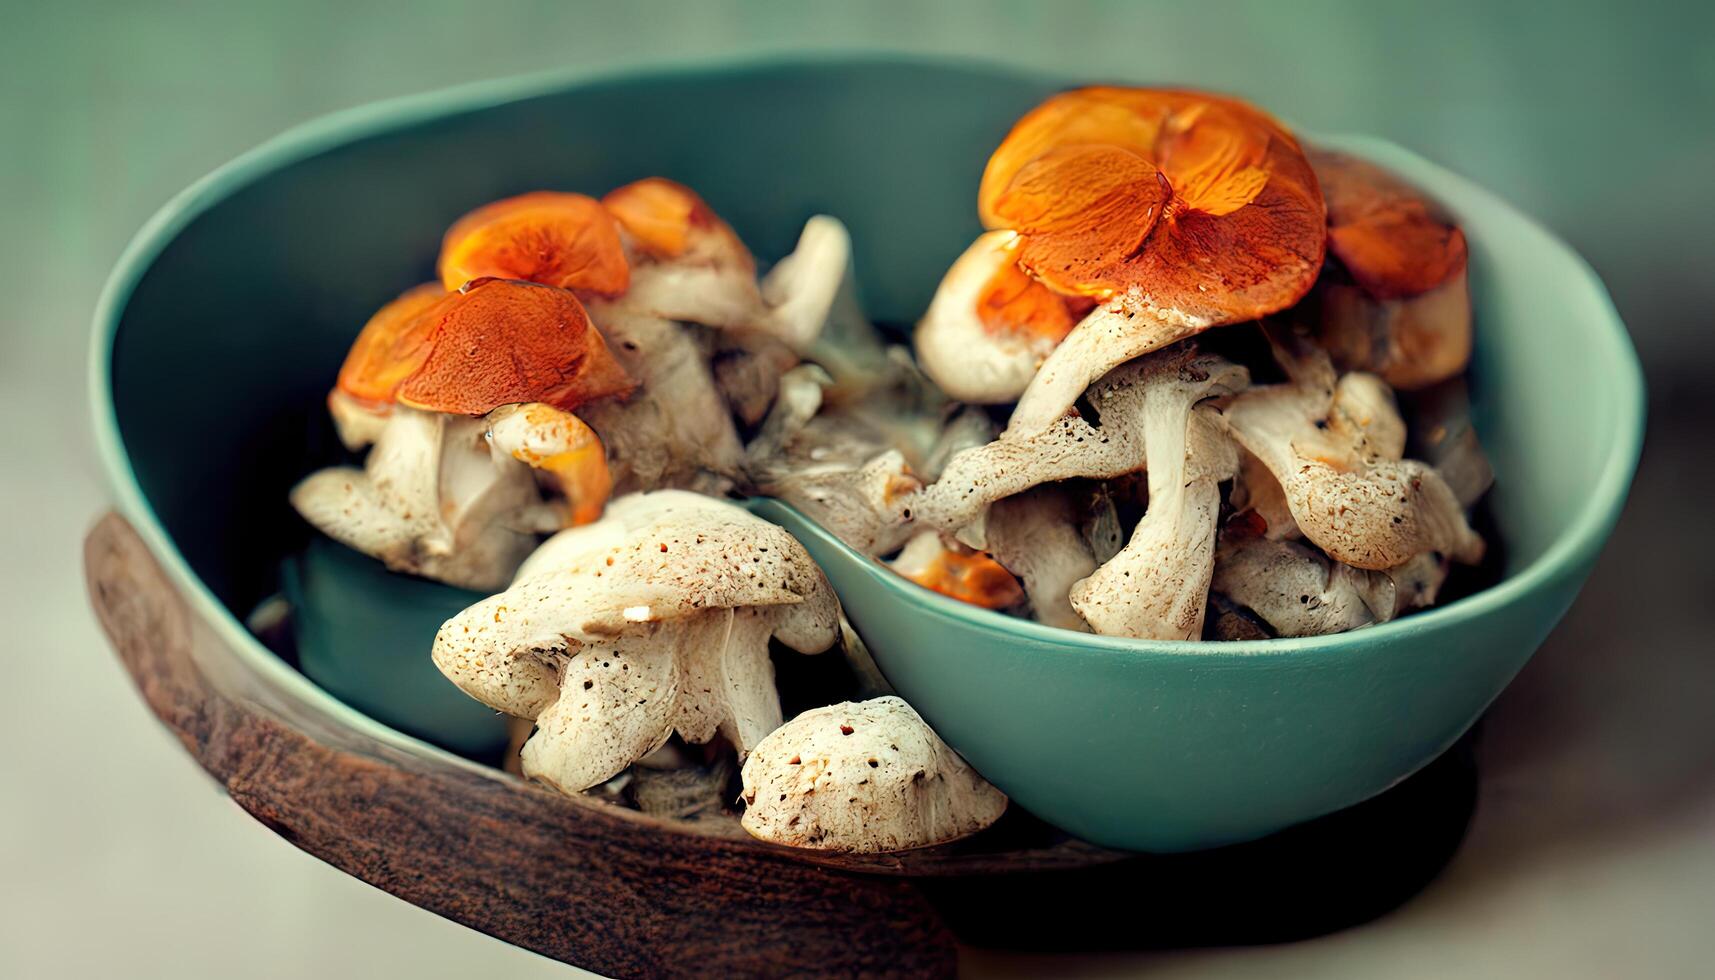 small white button mushrooms and curry powder served in a bowl. photo